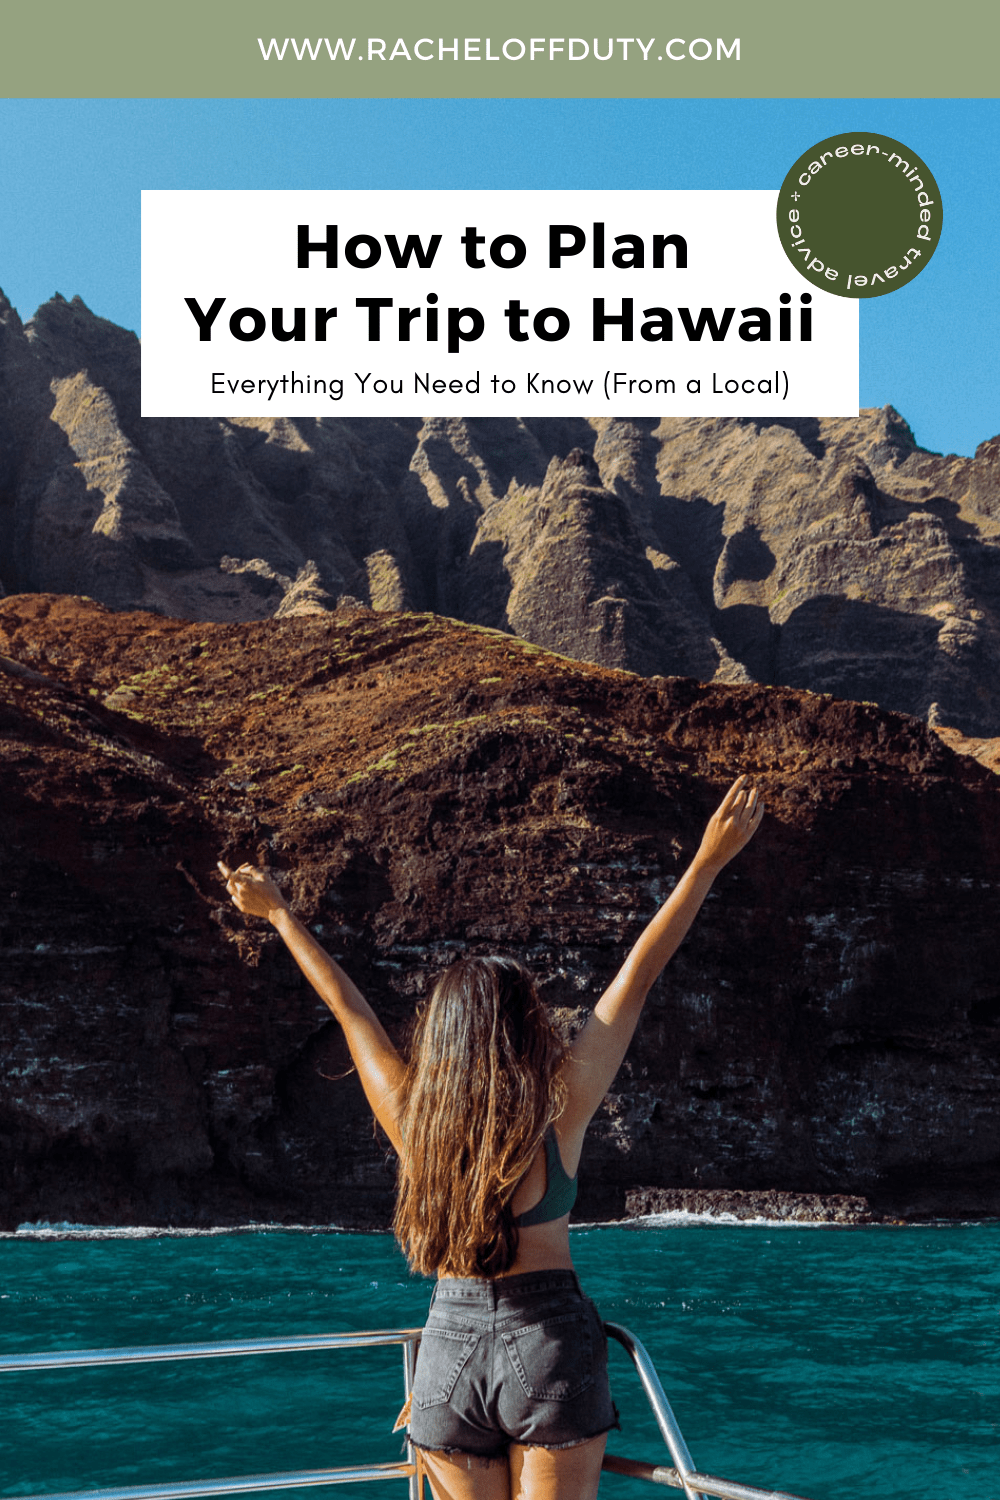 Rachel Off Duty: How to Plan a Trip to Hawaii – Everything You Need to Know